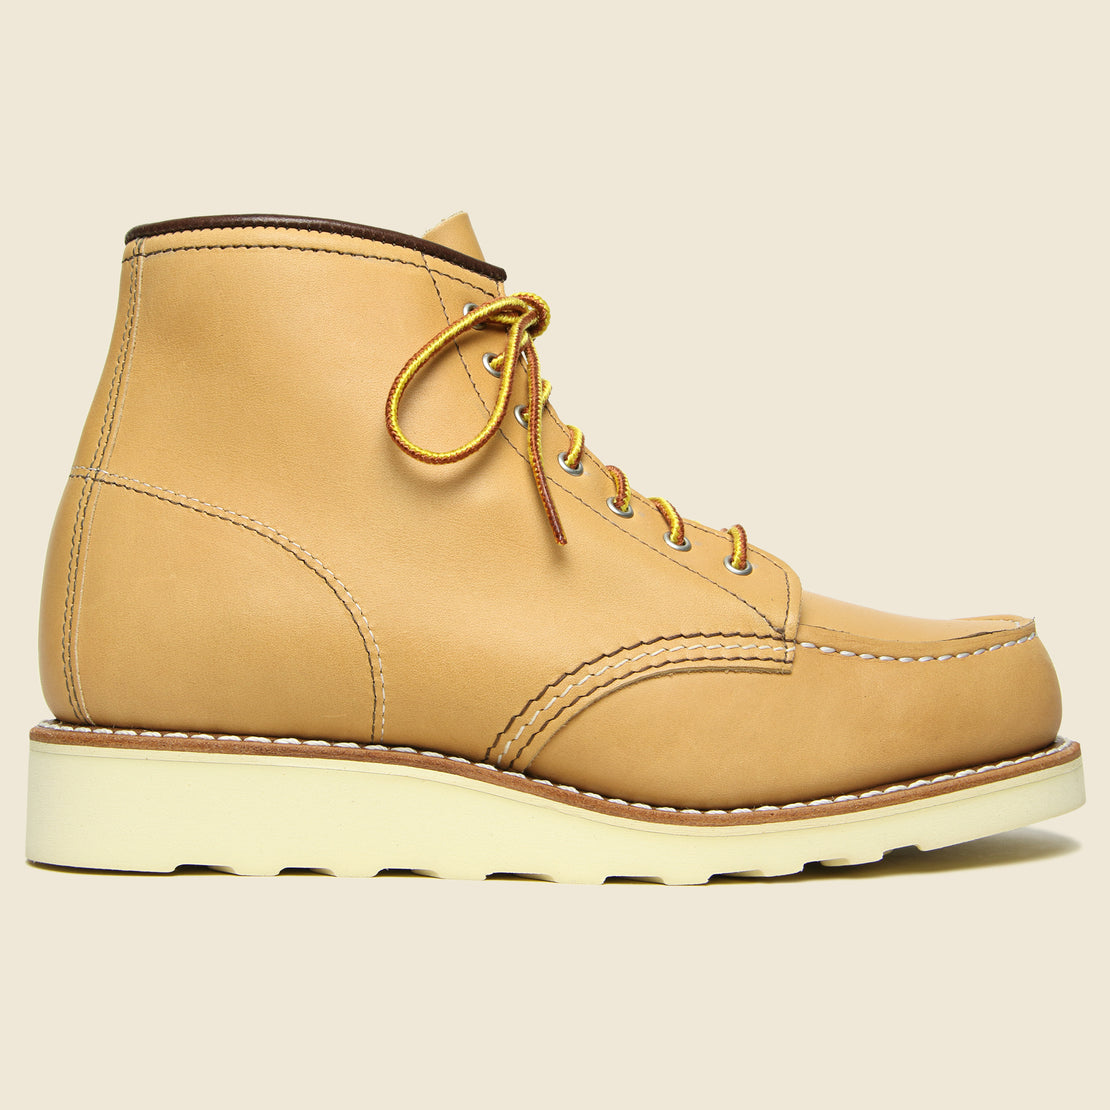 Red Wing 6" Moc Toe No. 3374 - Beige Pampas